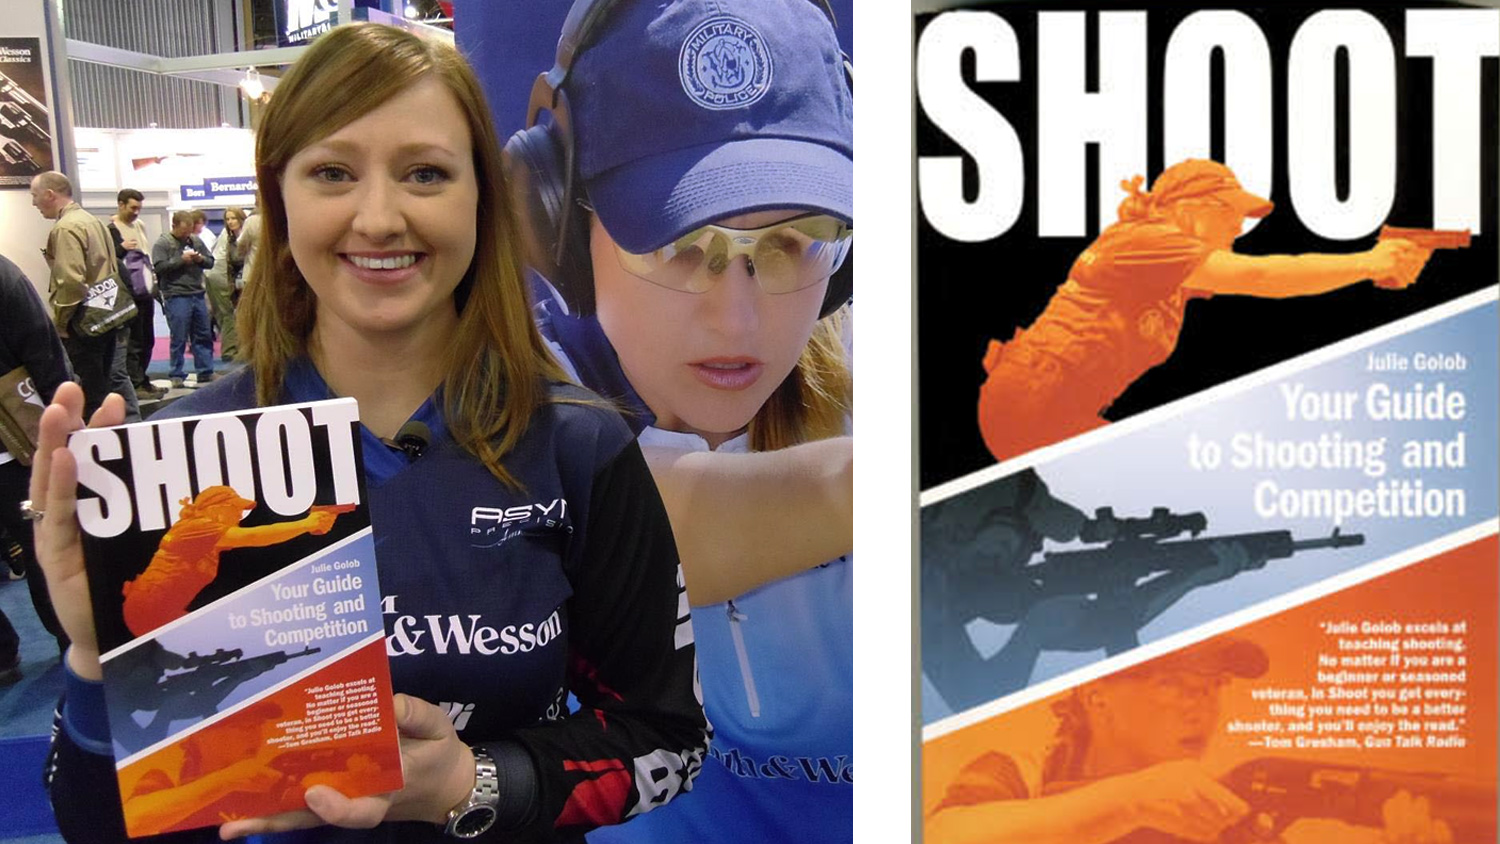 SHOOT: Your Guide to Shooting and Competition by Julie Golob